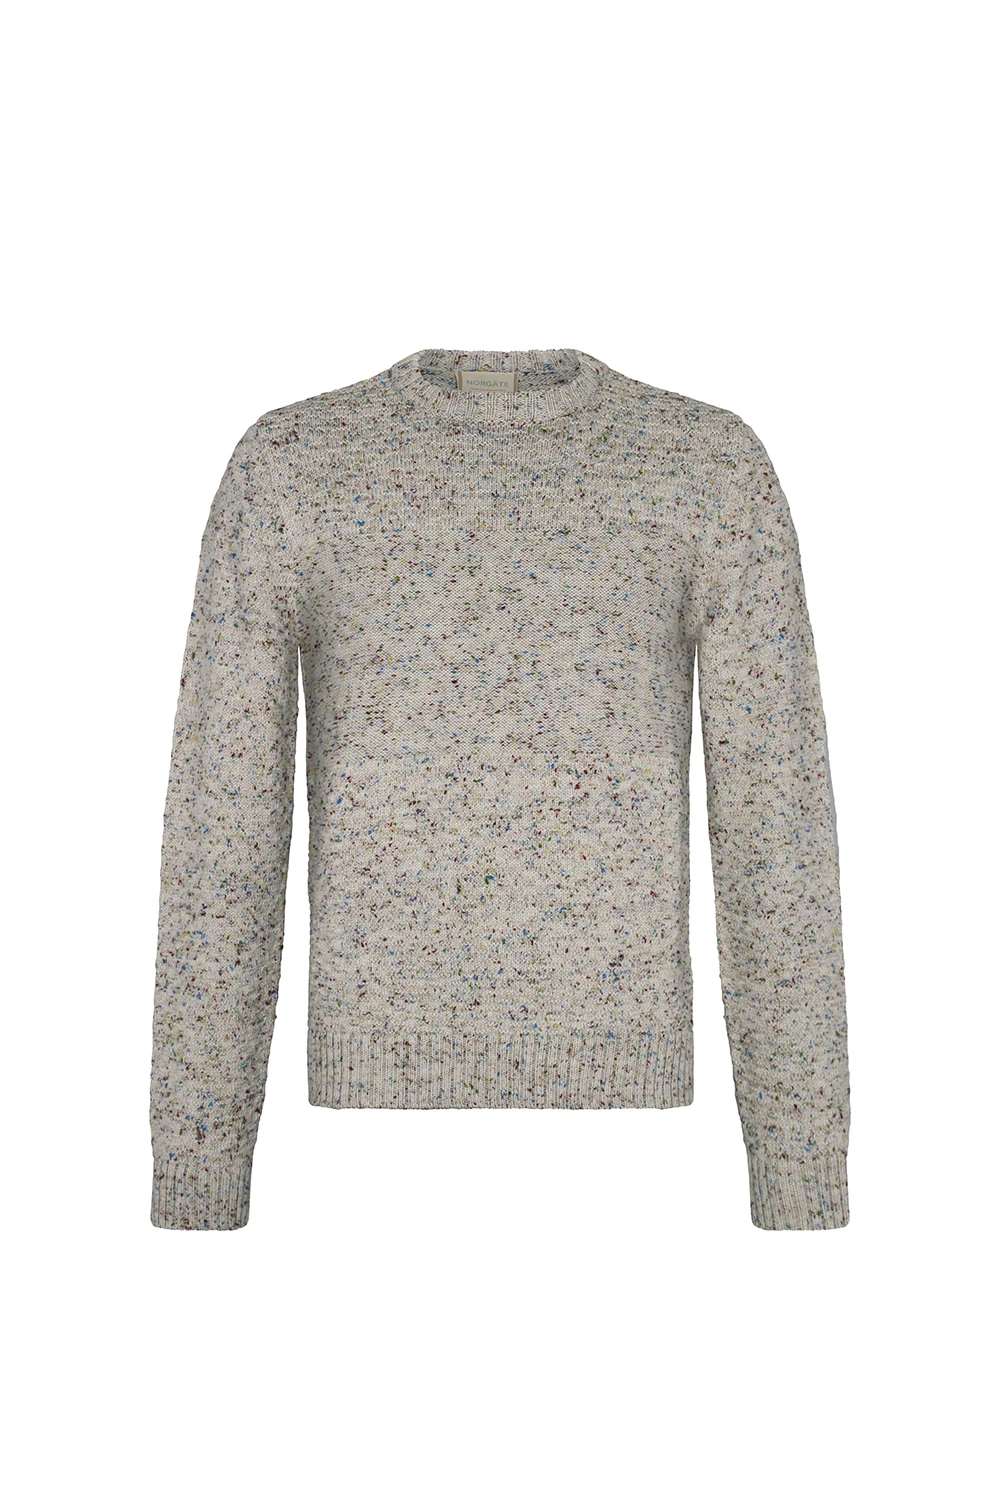 Dotcy Sweater - Men's Clothing - Norgate. Luxury Alpaca Cothing